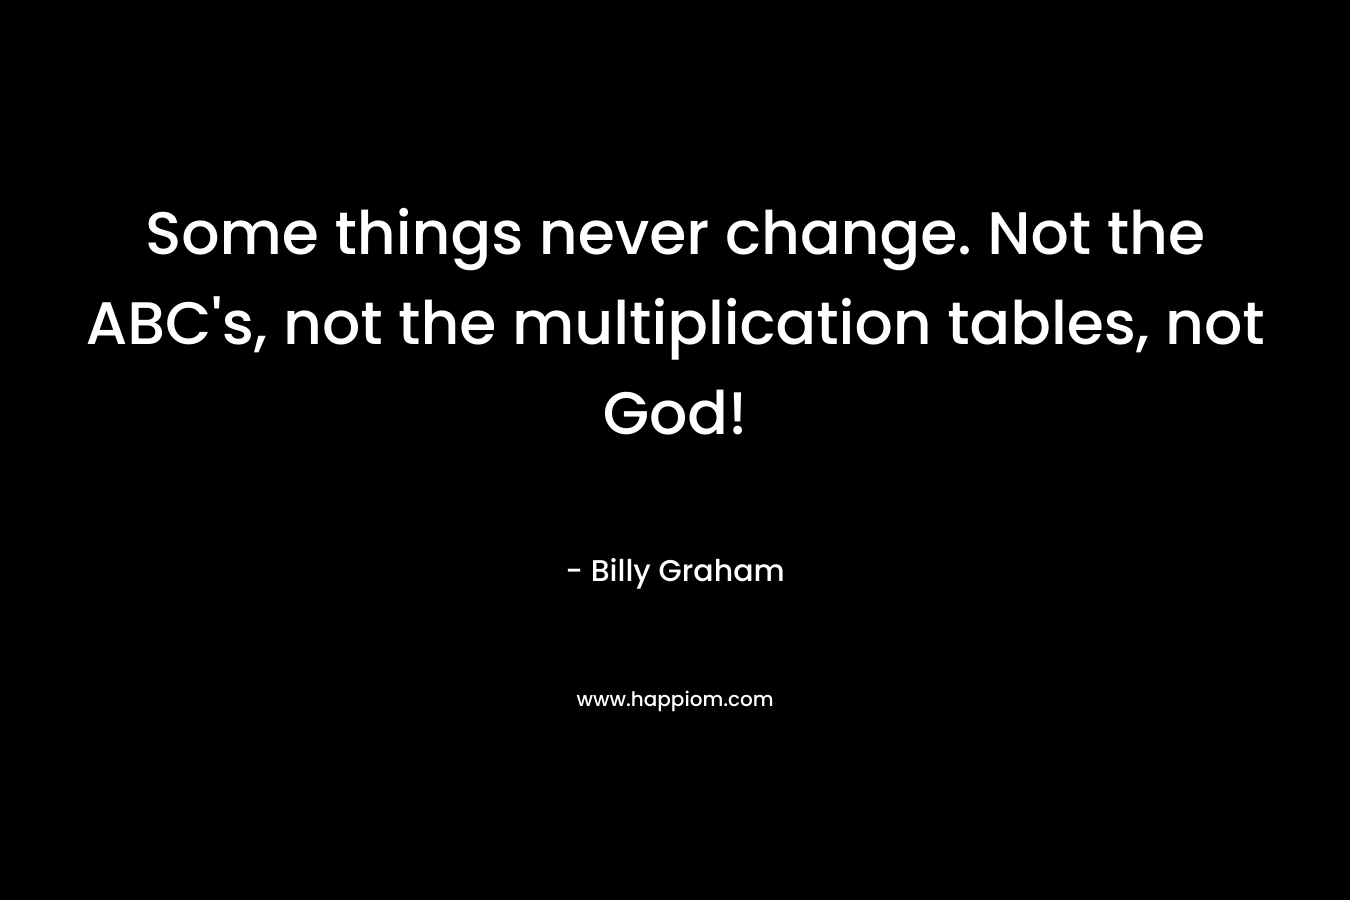 Some things never change. Not the ABC’s, not the multiplication tables, not God! – Billy Graham